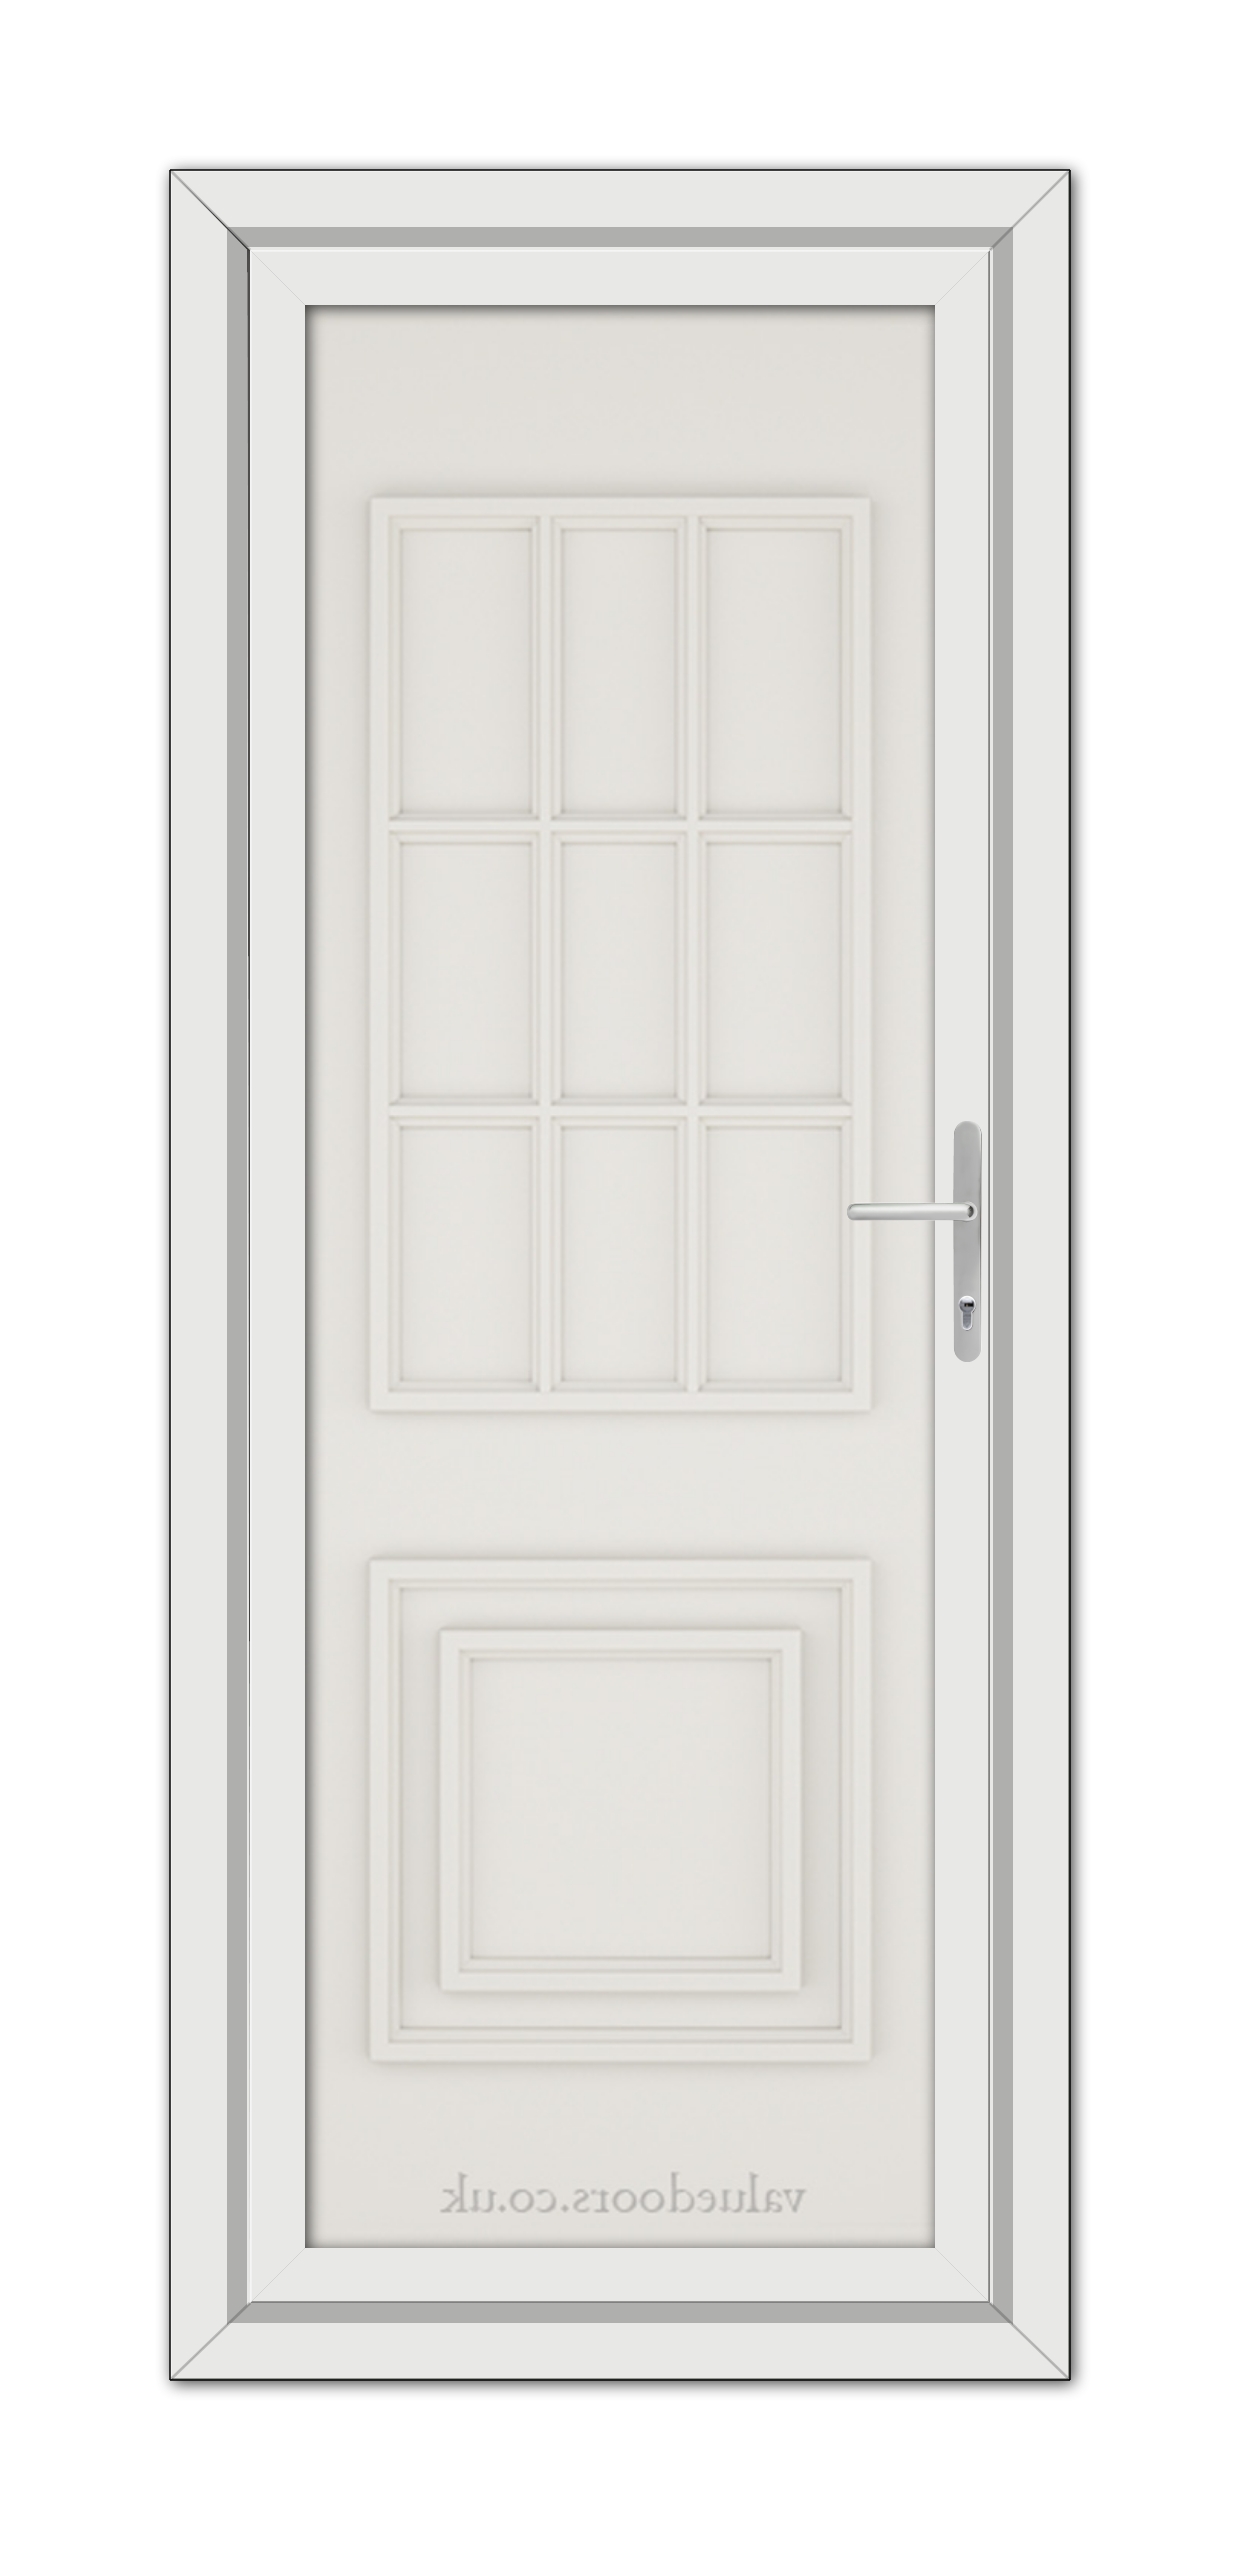 A White Cream Cambridge One Solid uPVC Door with a silver handle.